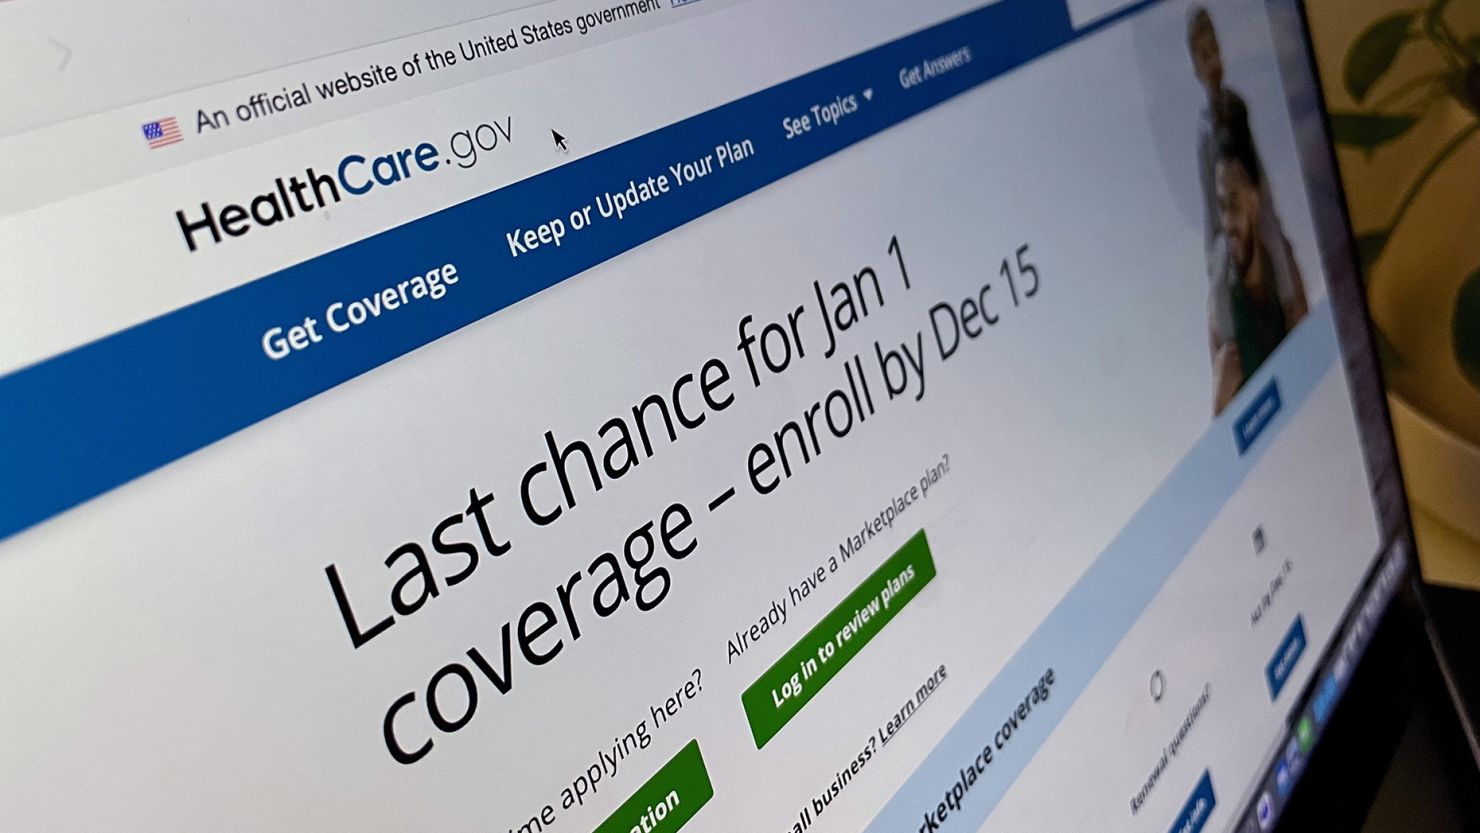 Democratic voters now care more about the Affordable Care Act than GOP voters do, according to a KFF poll.